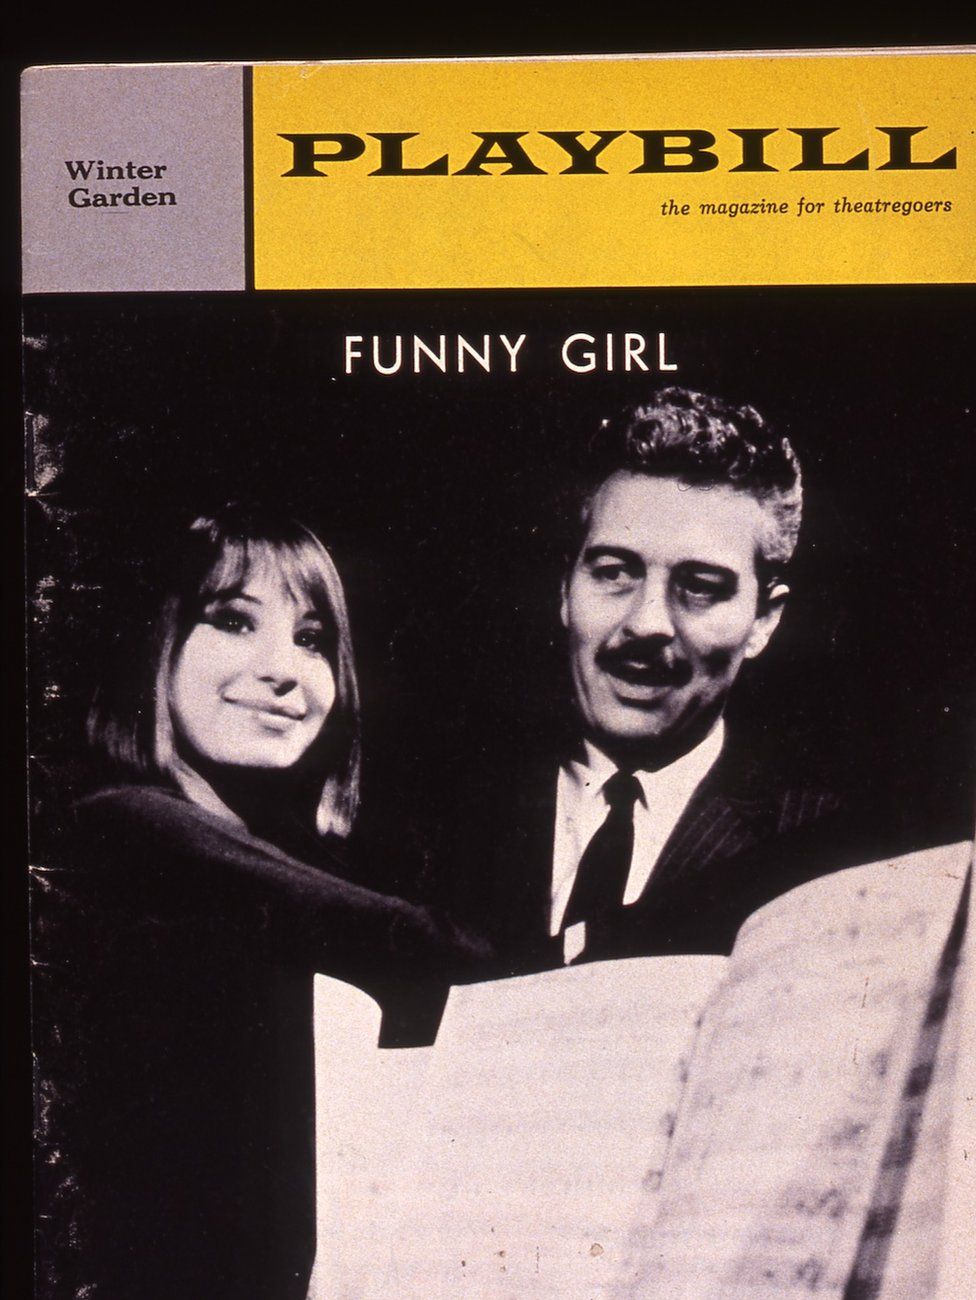 The Broadway programme for Funny Girl